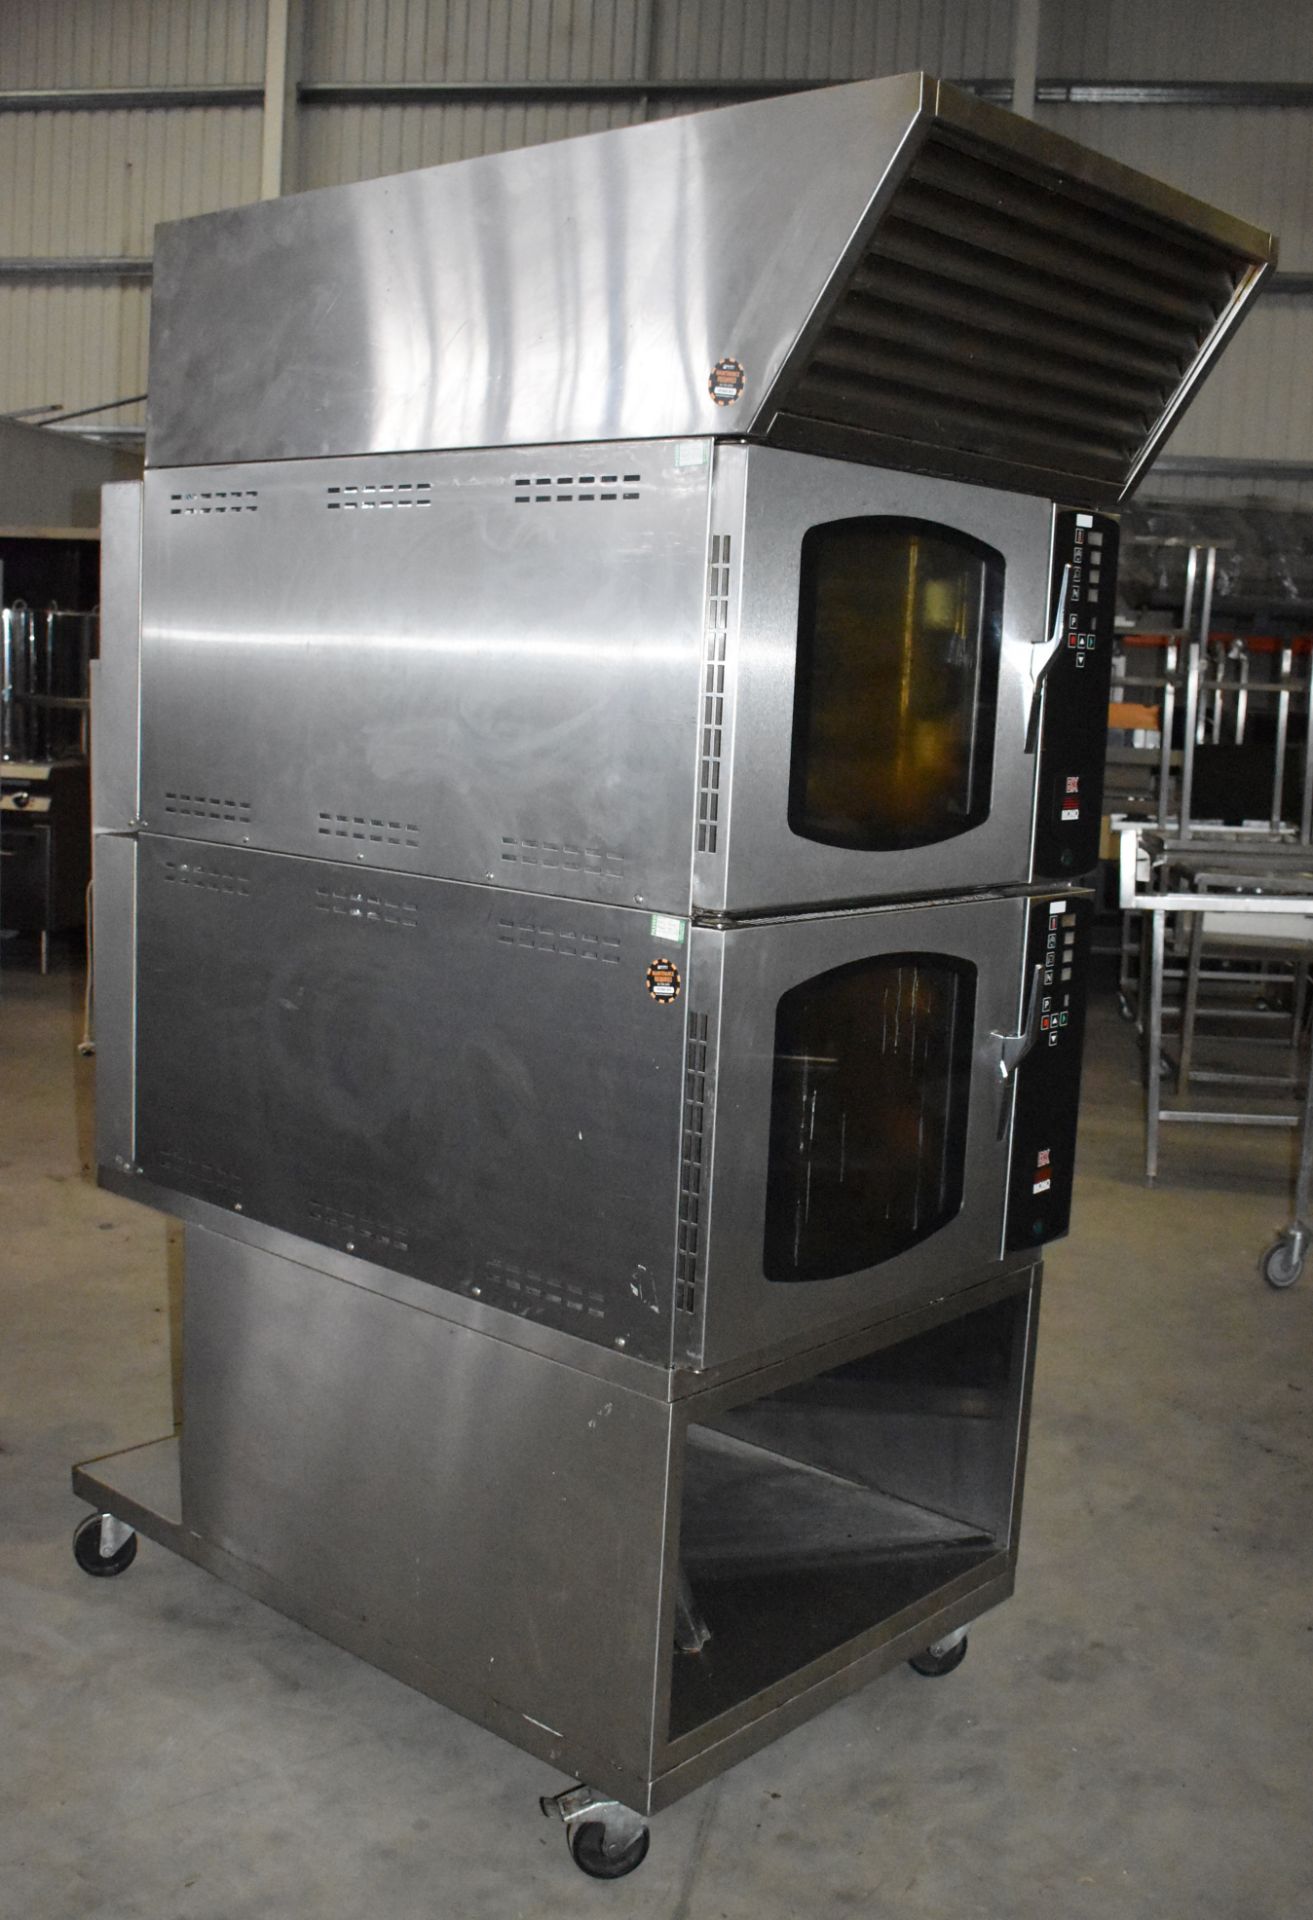 1 x Mono Double Classic and Steam BX Convection Oven - Model FG159C - 3 Phase Power - H210 x W83 x - Image 2 of 15